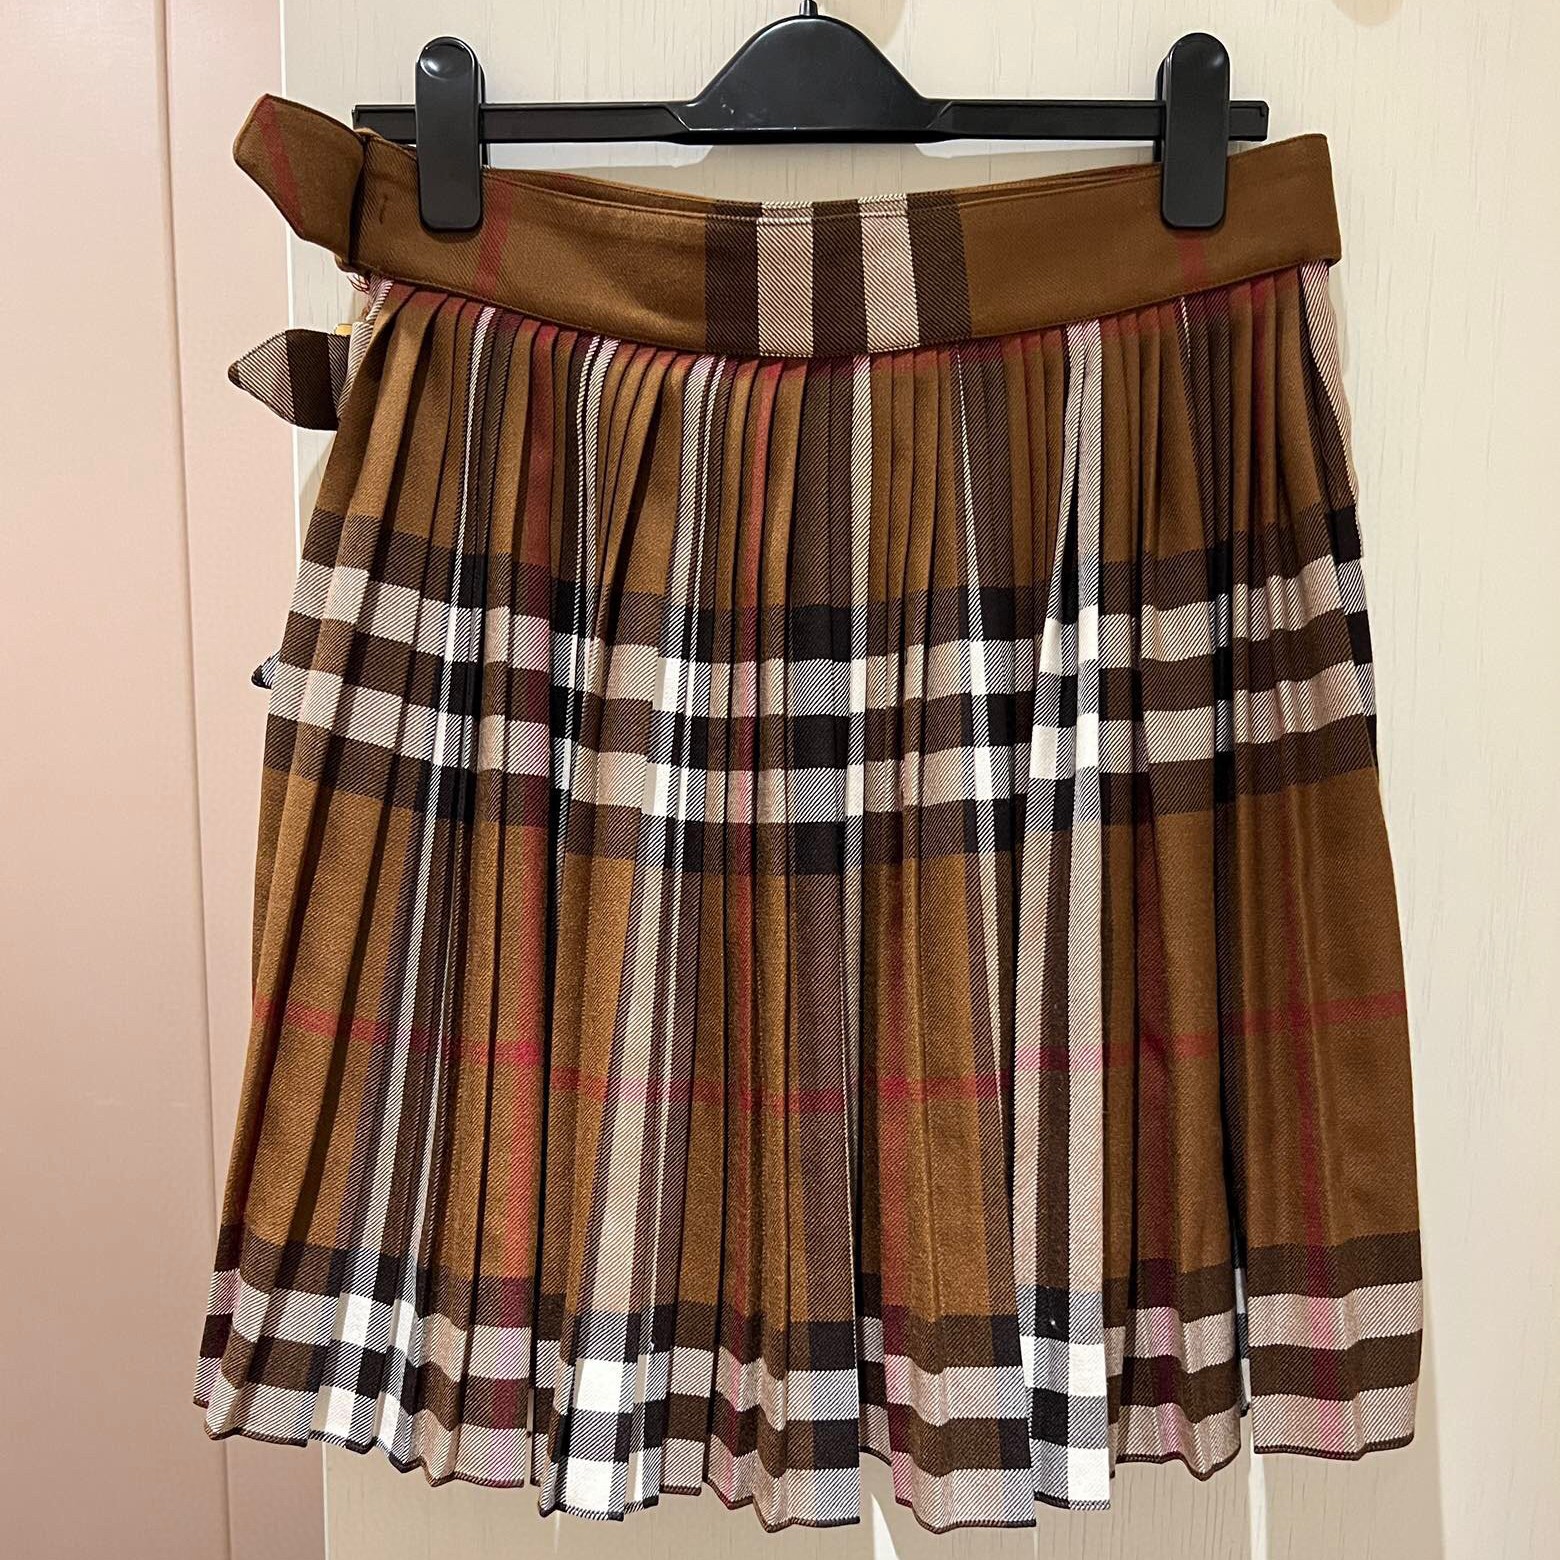 9A+ quality burberry skirts